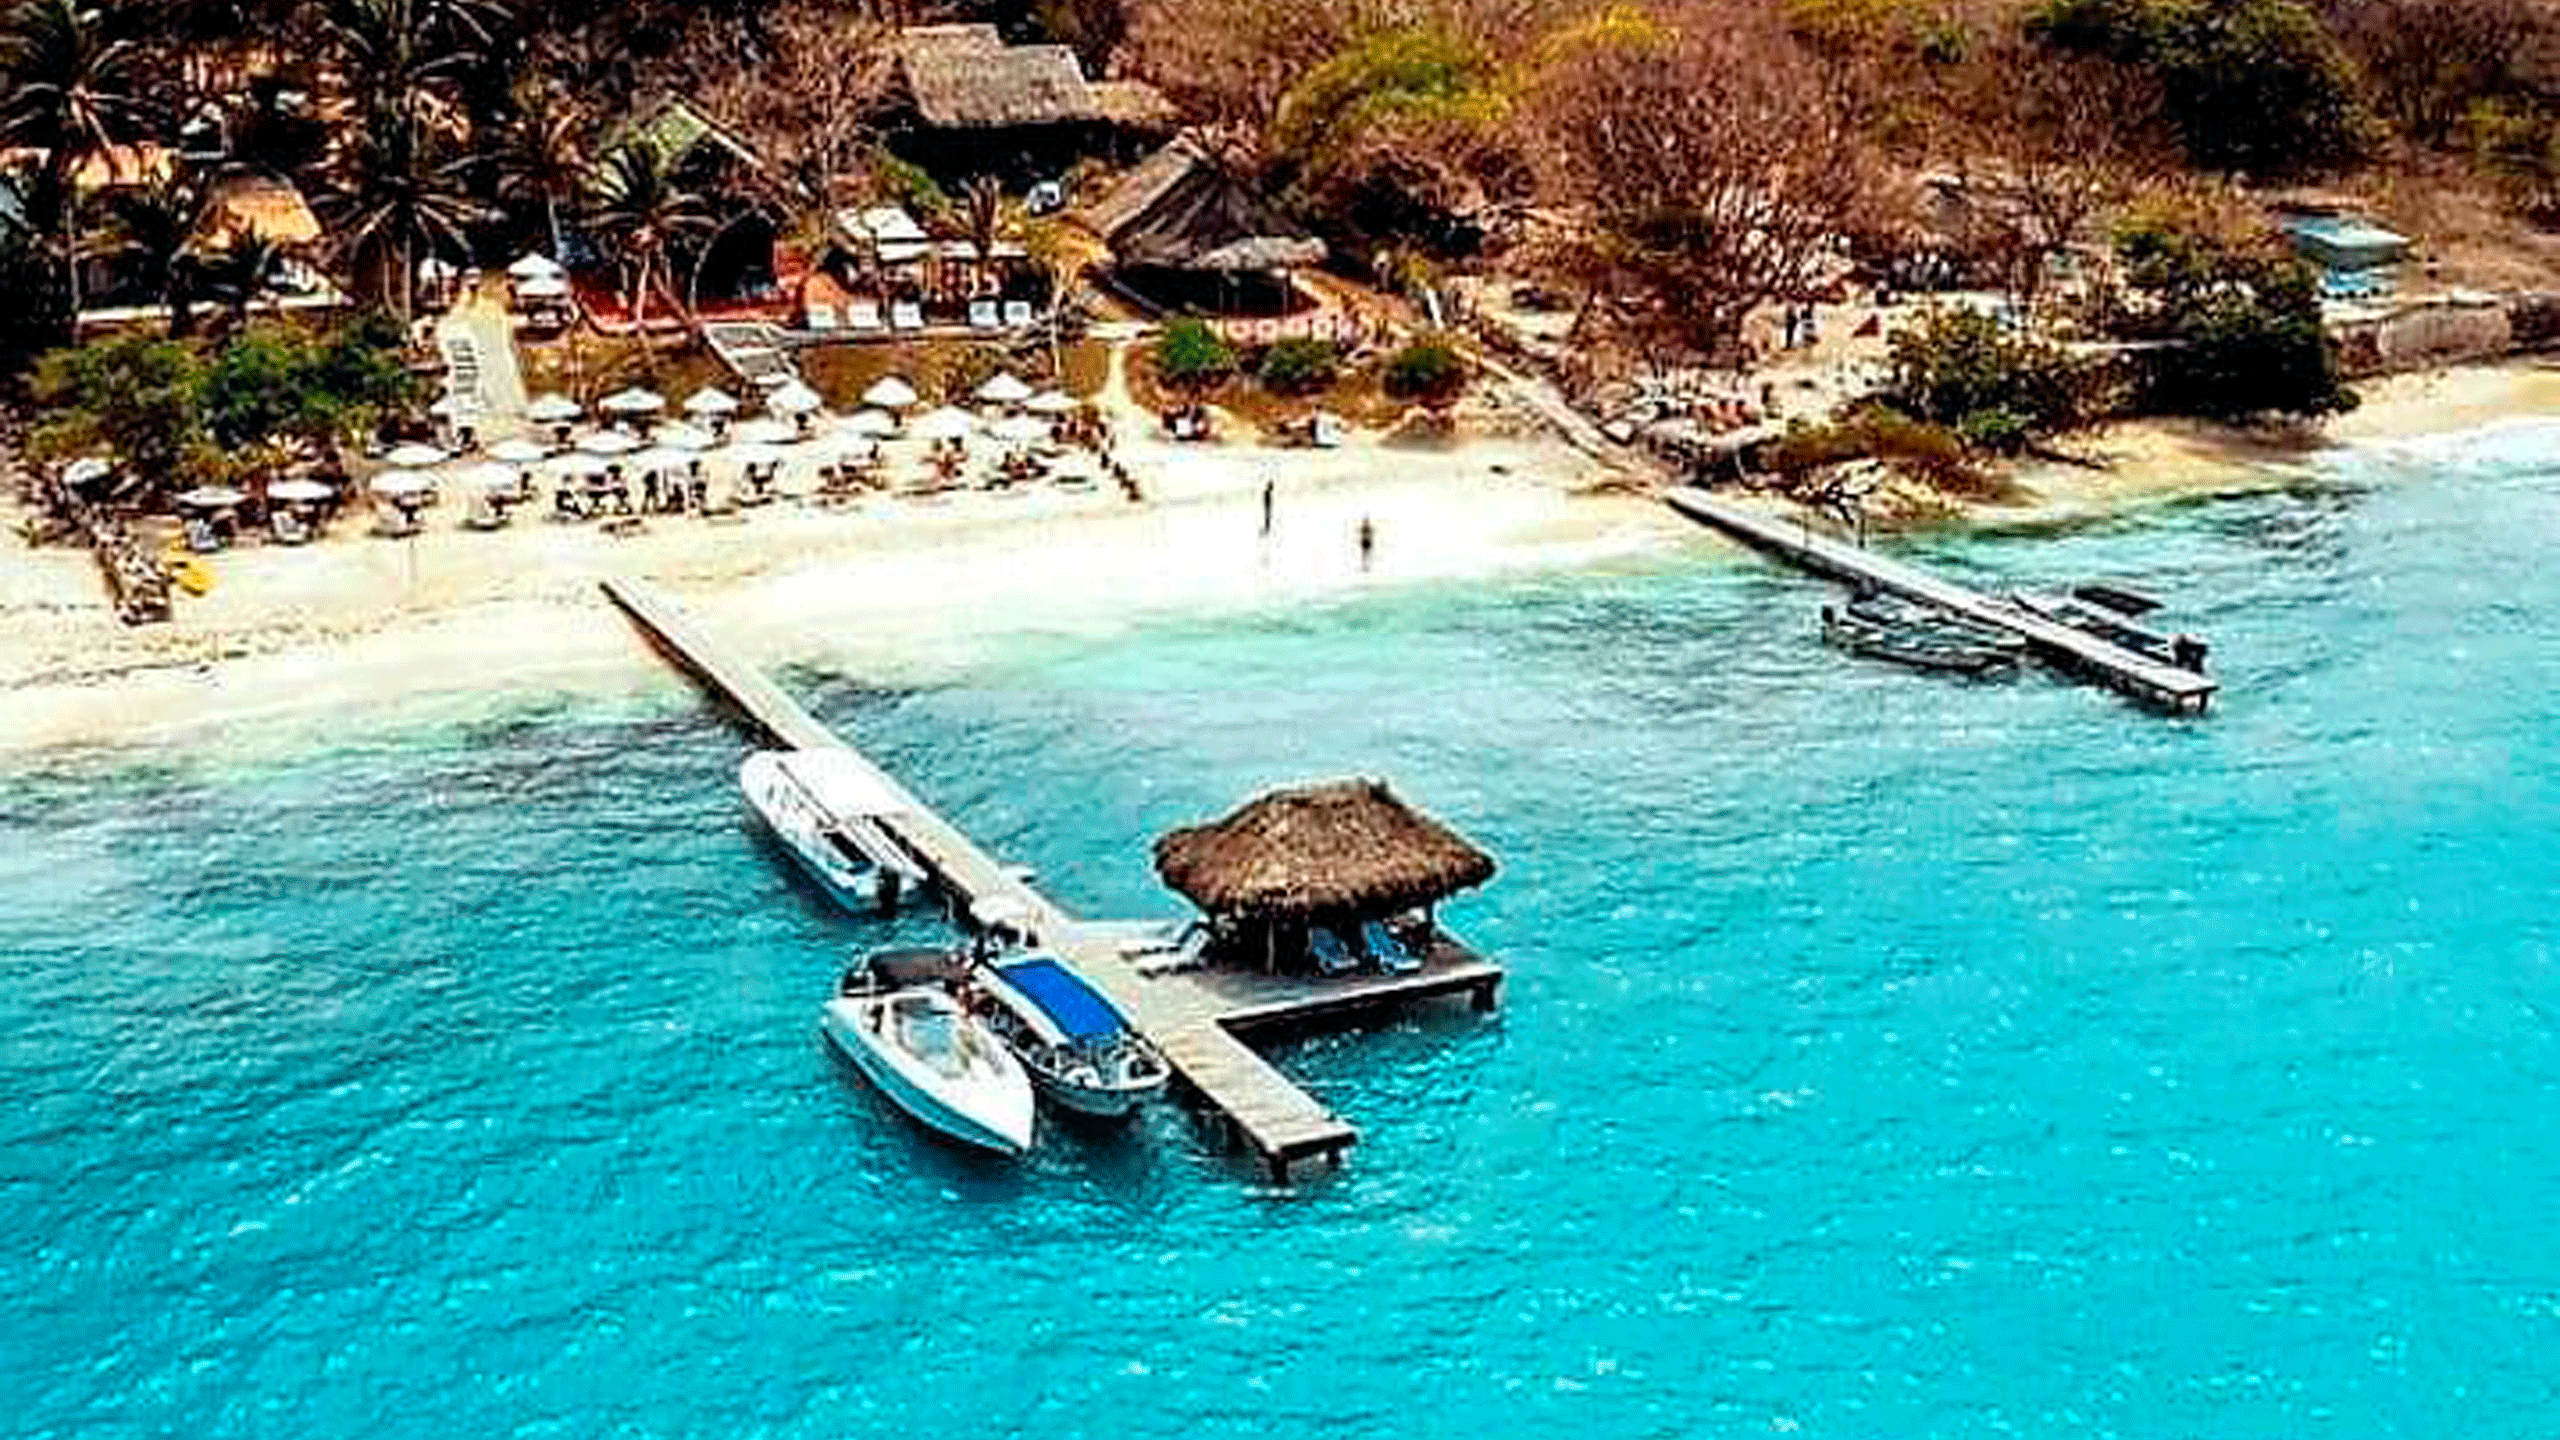 Beyond Colombia Tours | Tour: Luxury Beach Open Bar at Rosario Islands Day Trip